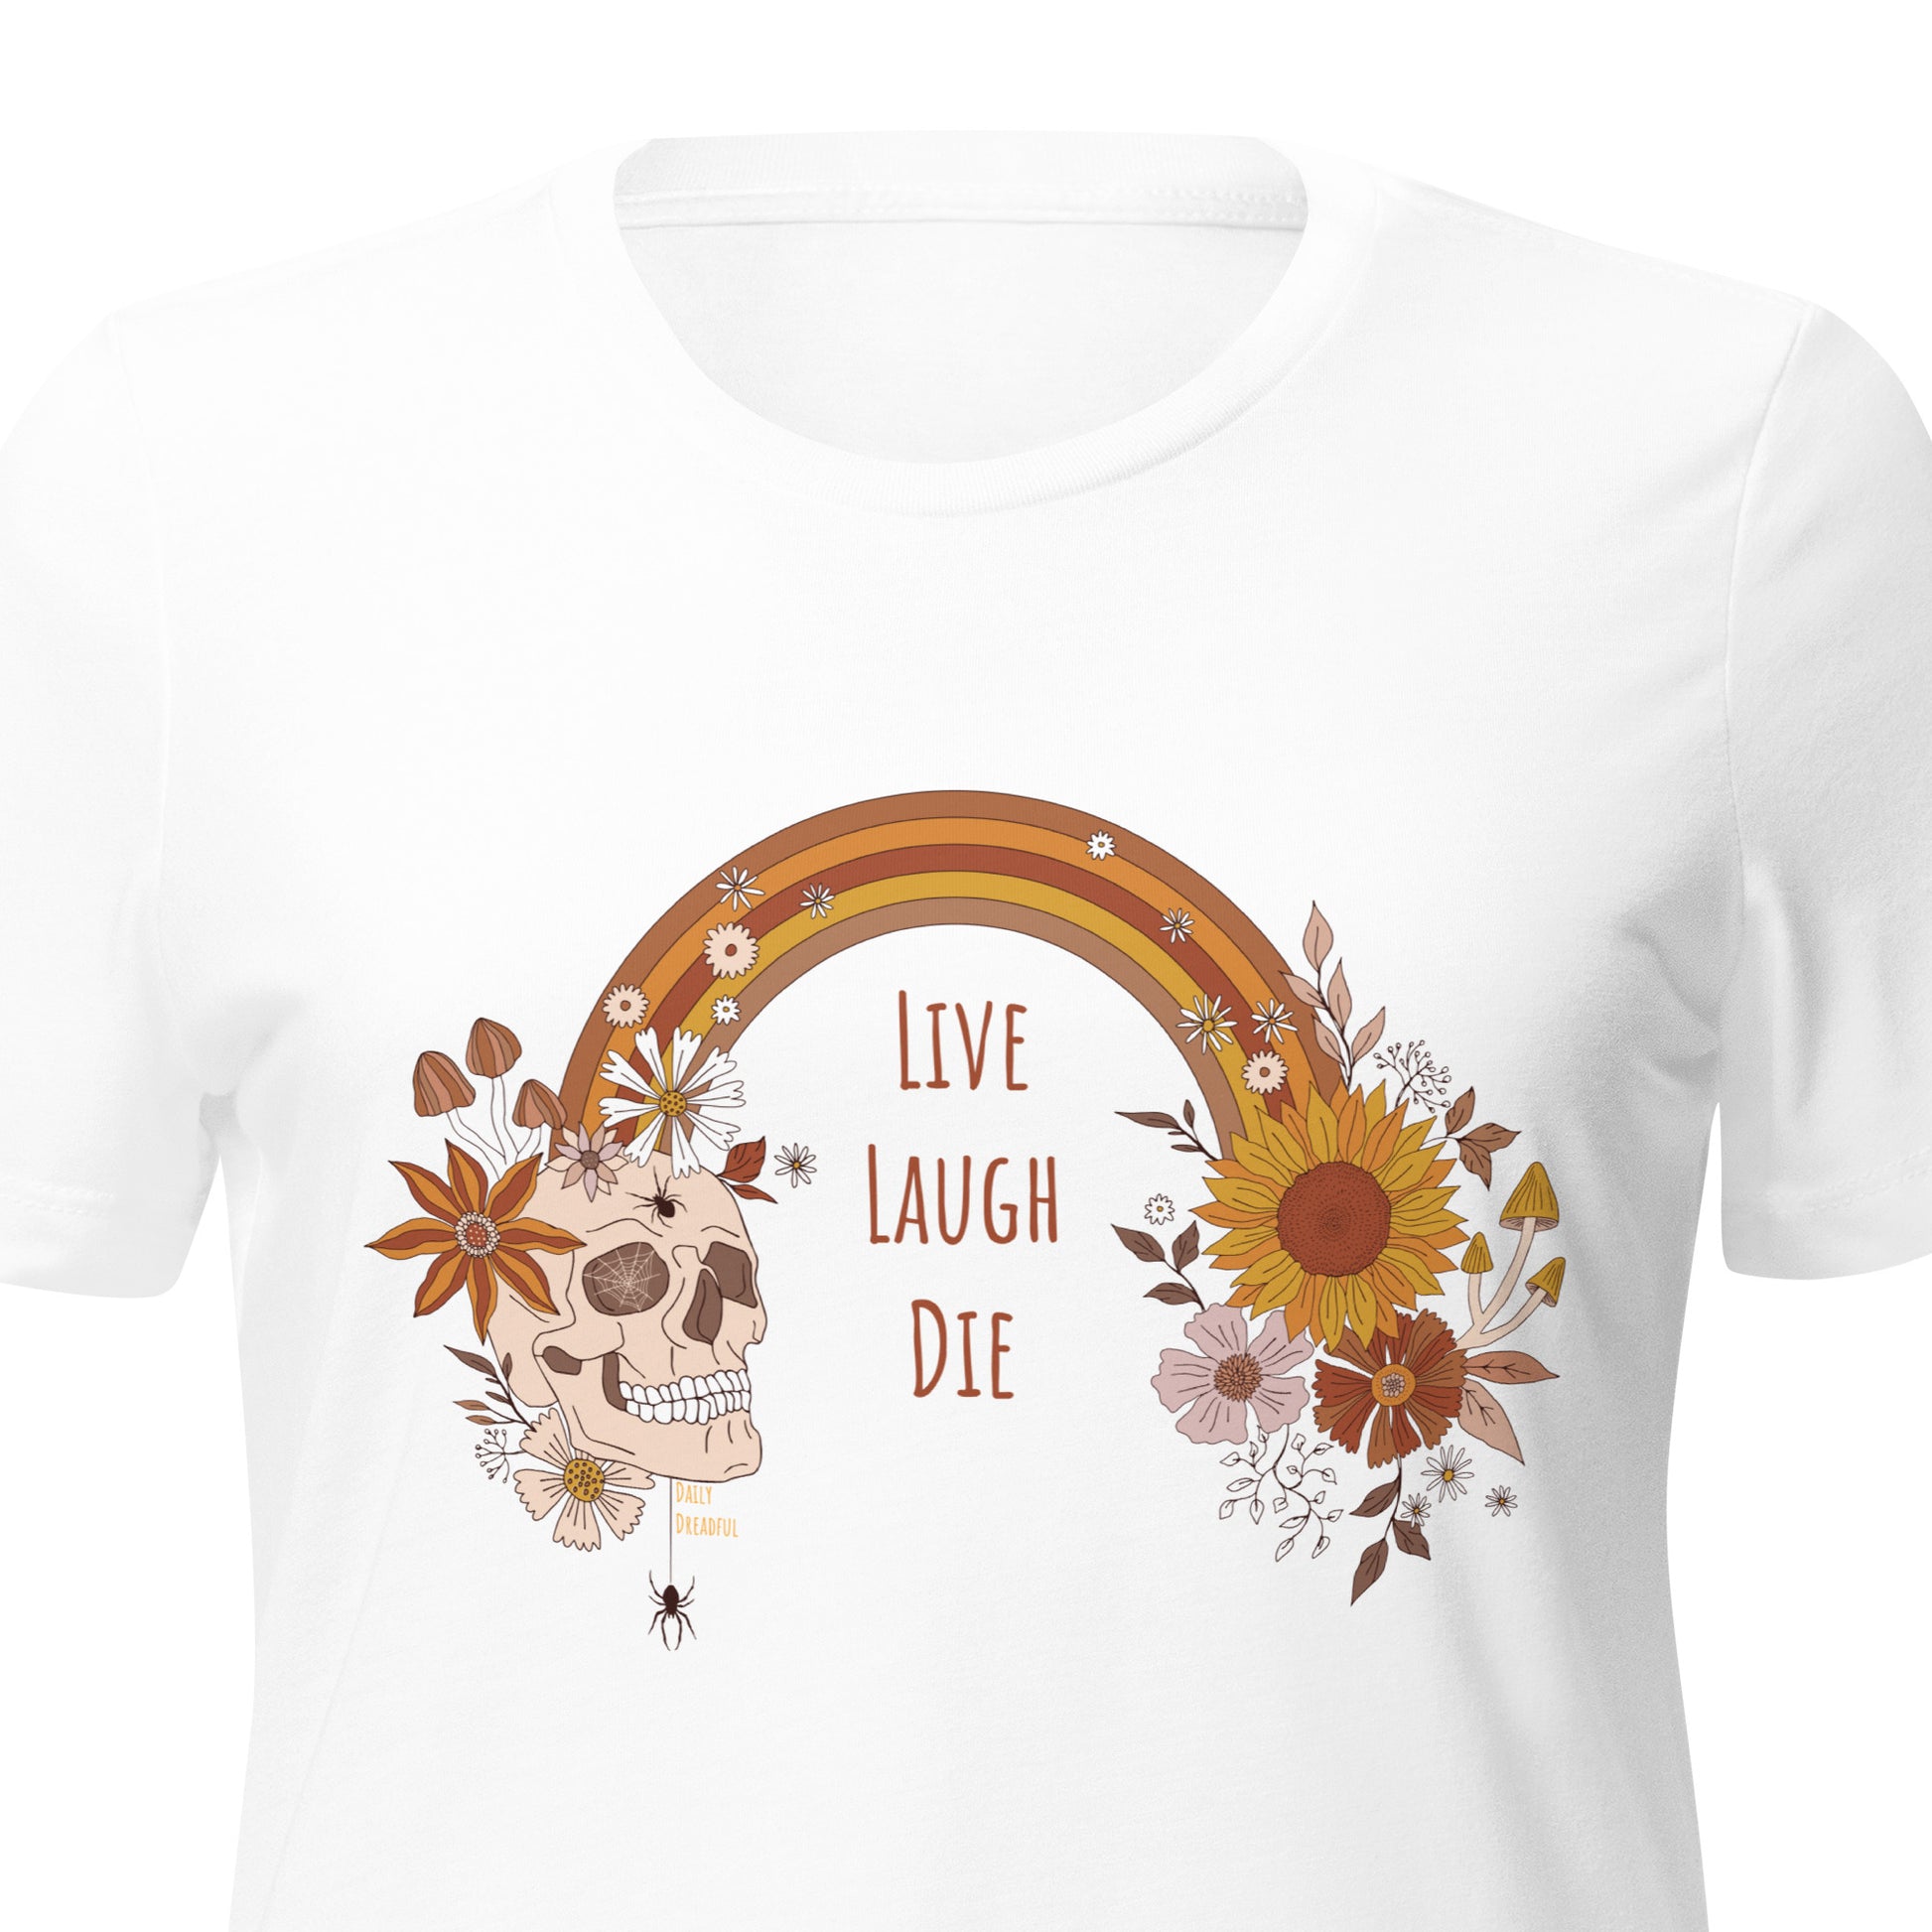 "Live, Laugh, Die" relaxed tri-blend t-shirt, white colored tee